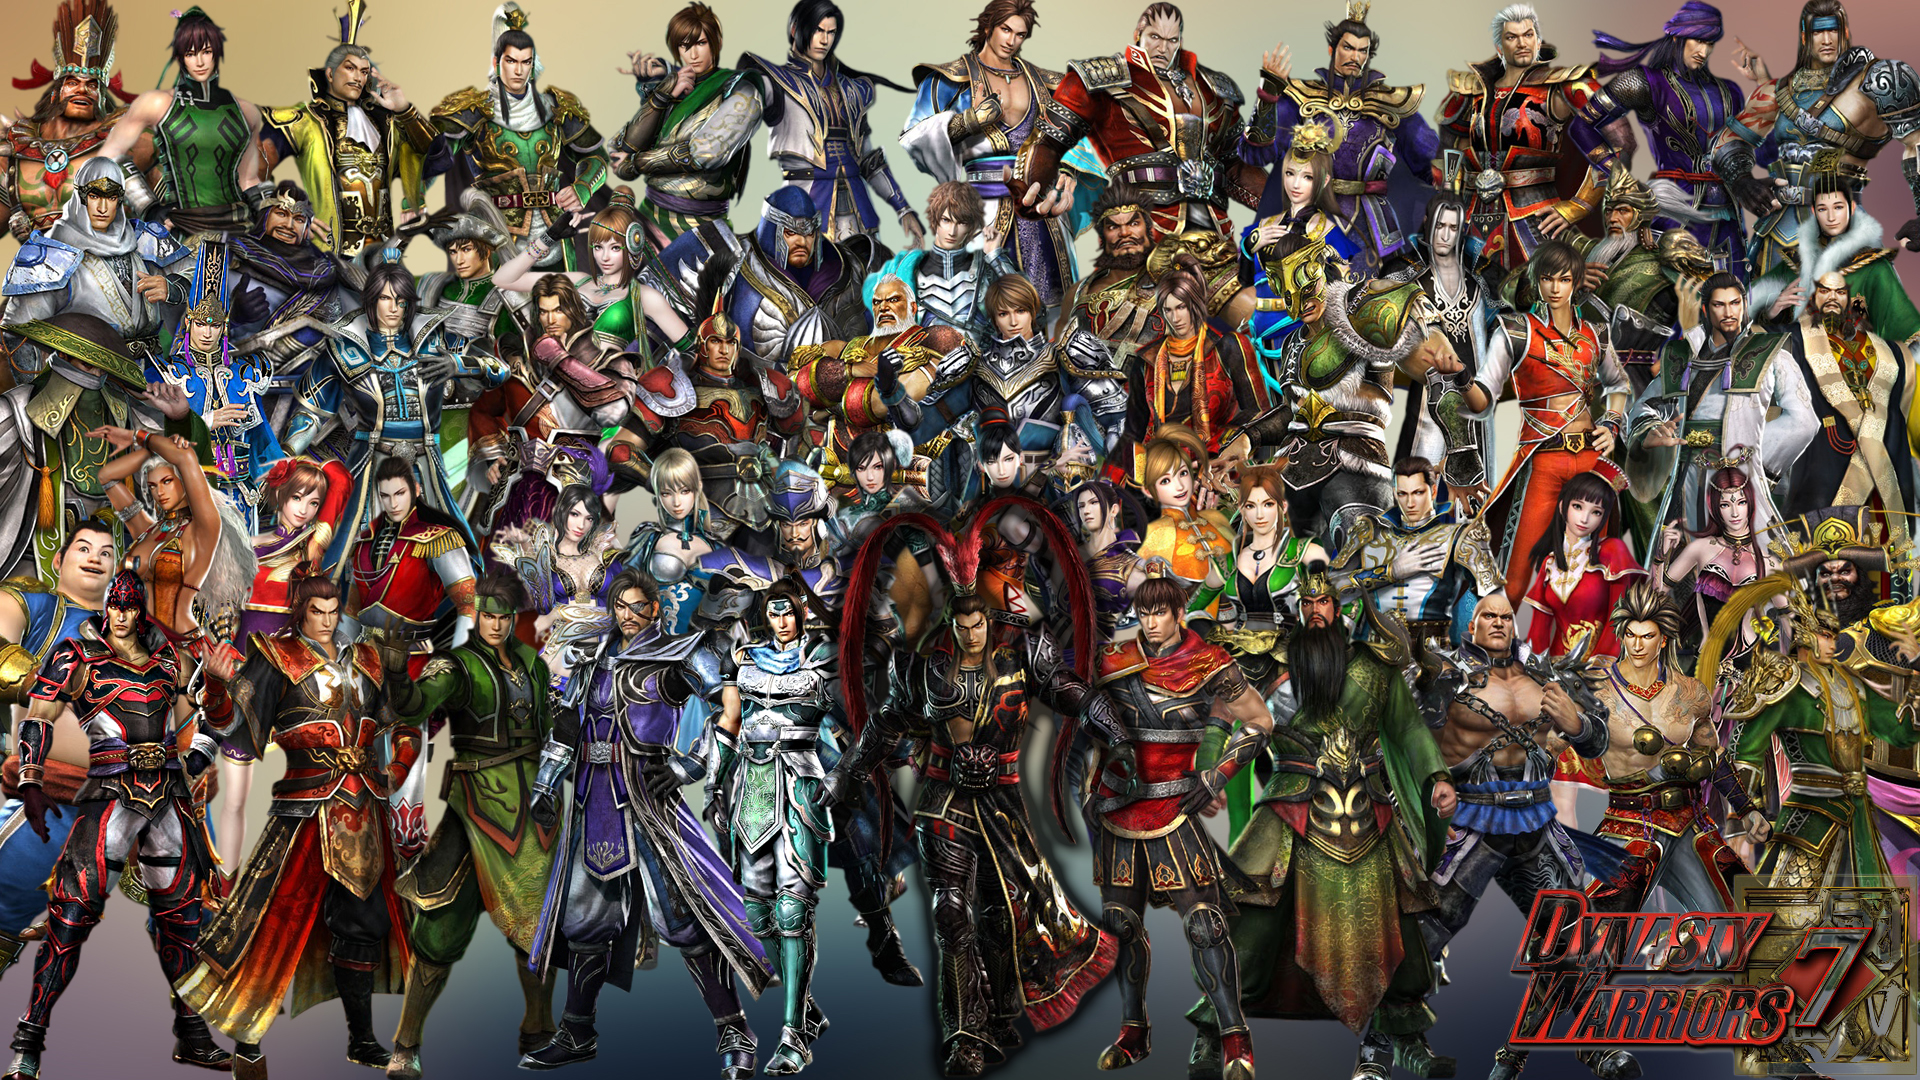 HQ Dynasty Warriors Wallpapers | File 2458.15Kb